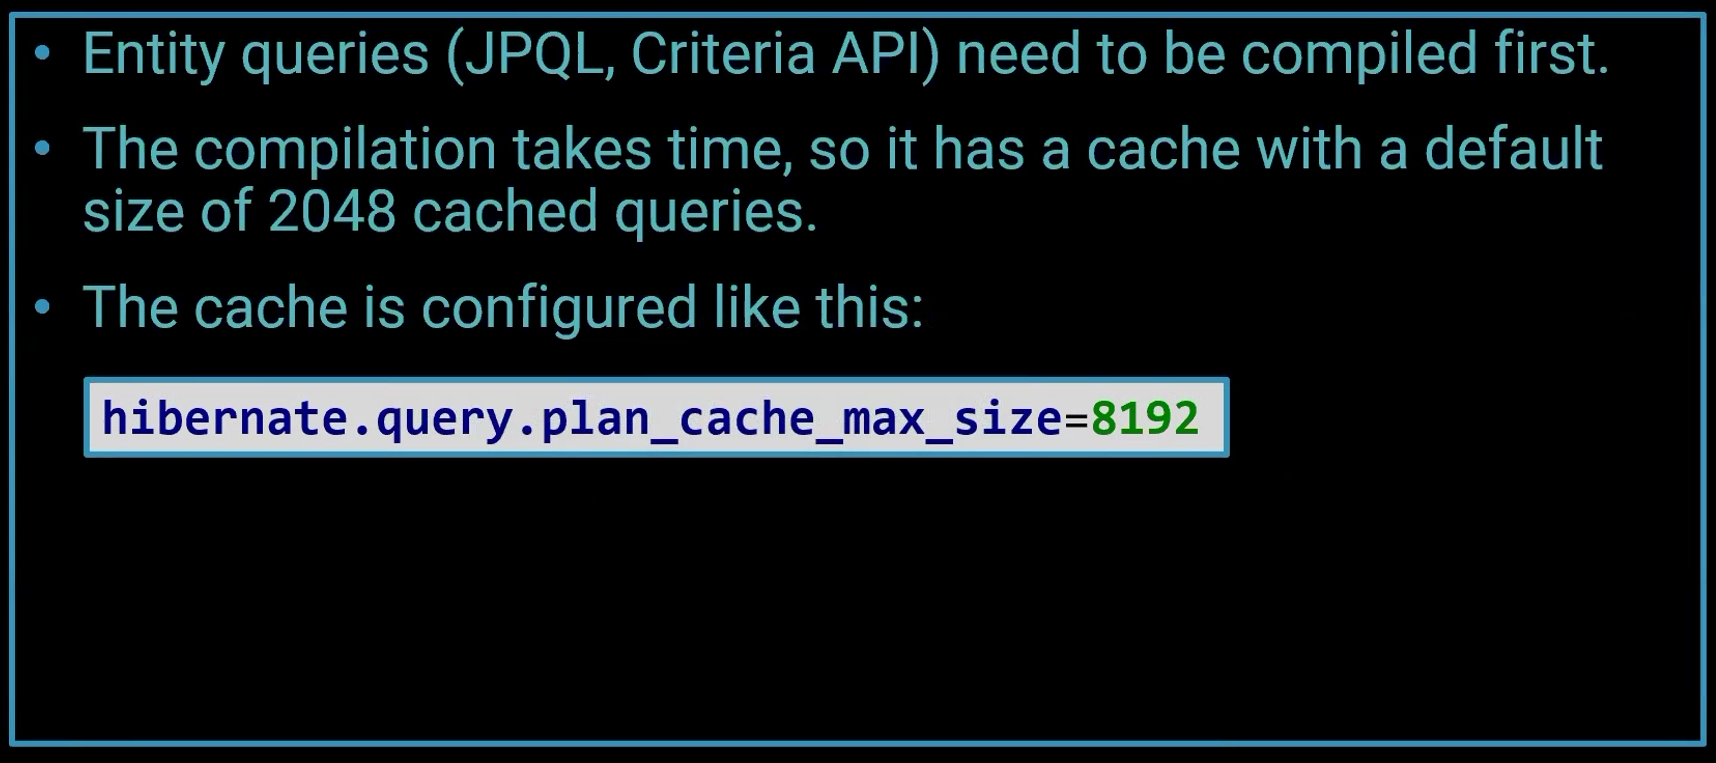 vlad8-query-plan-cache.png